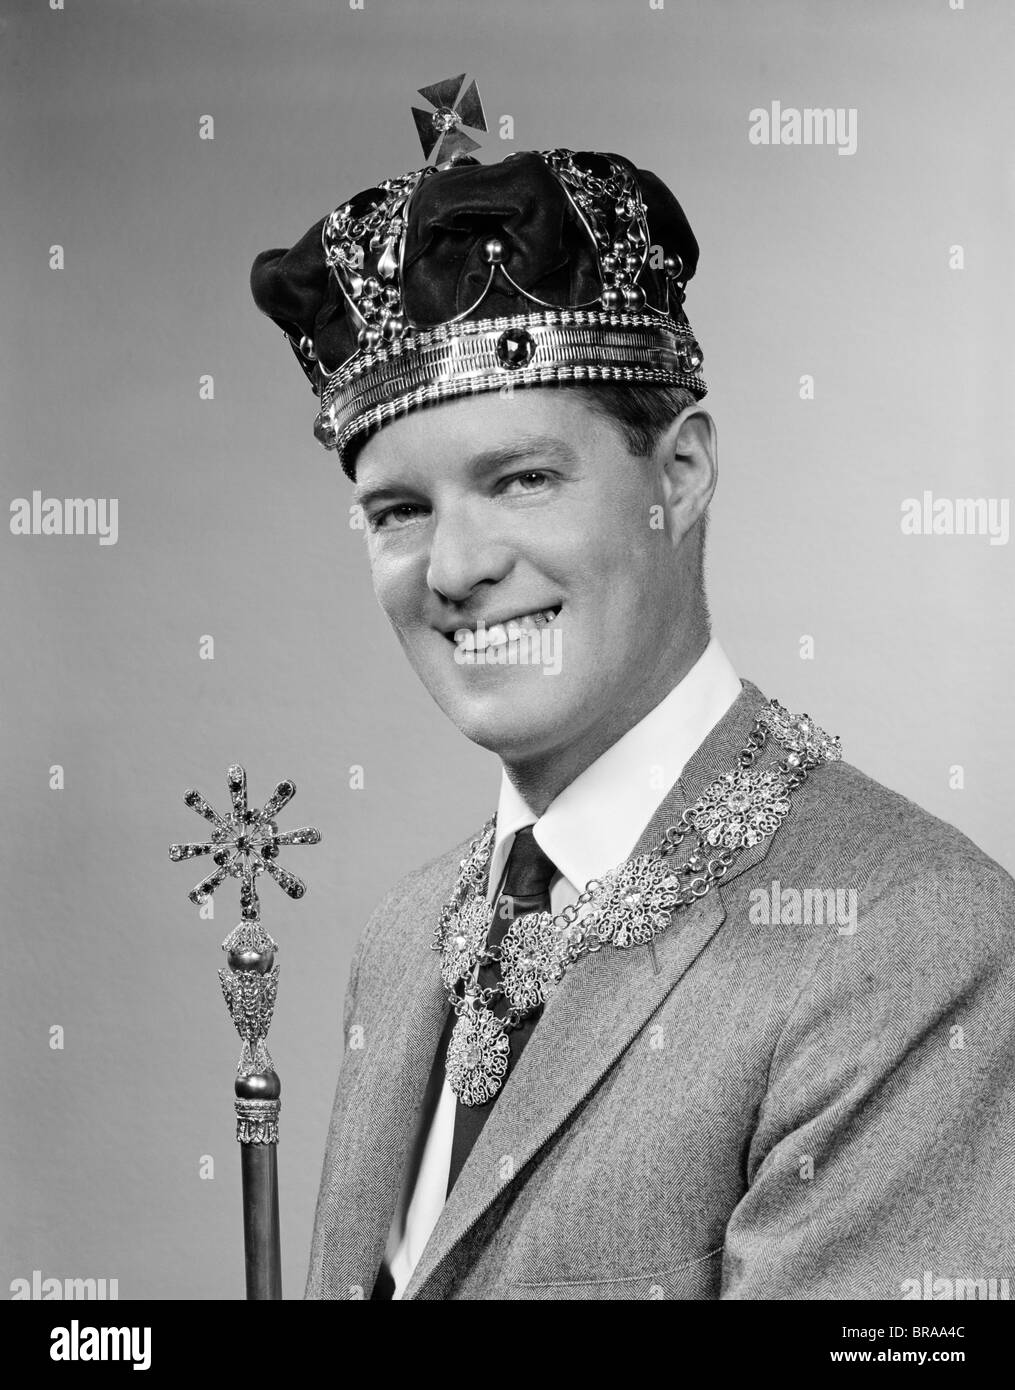 1950s PORTRAIT OF MAN WEARING A KING'S CROWN AND HOLDING A SCEPTER WHILE SMILING Stock Photo